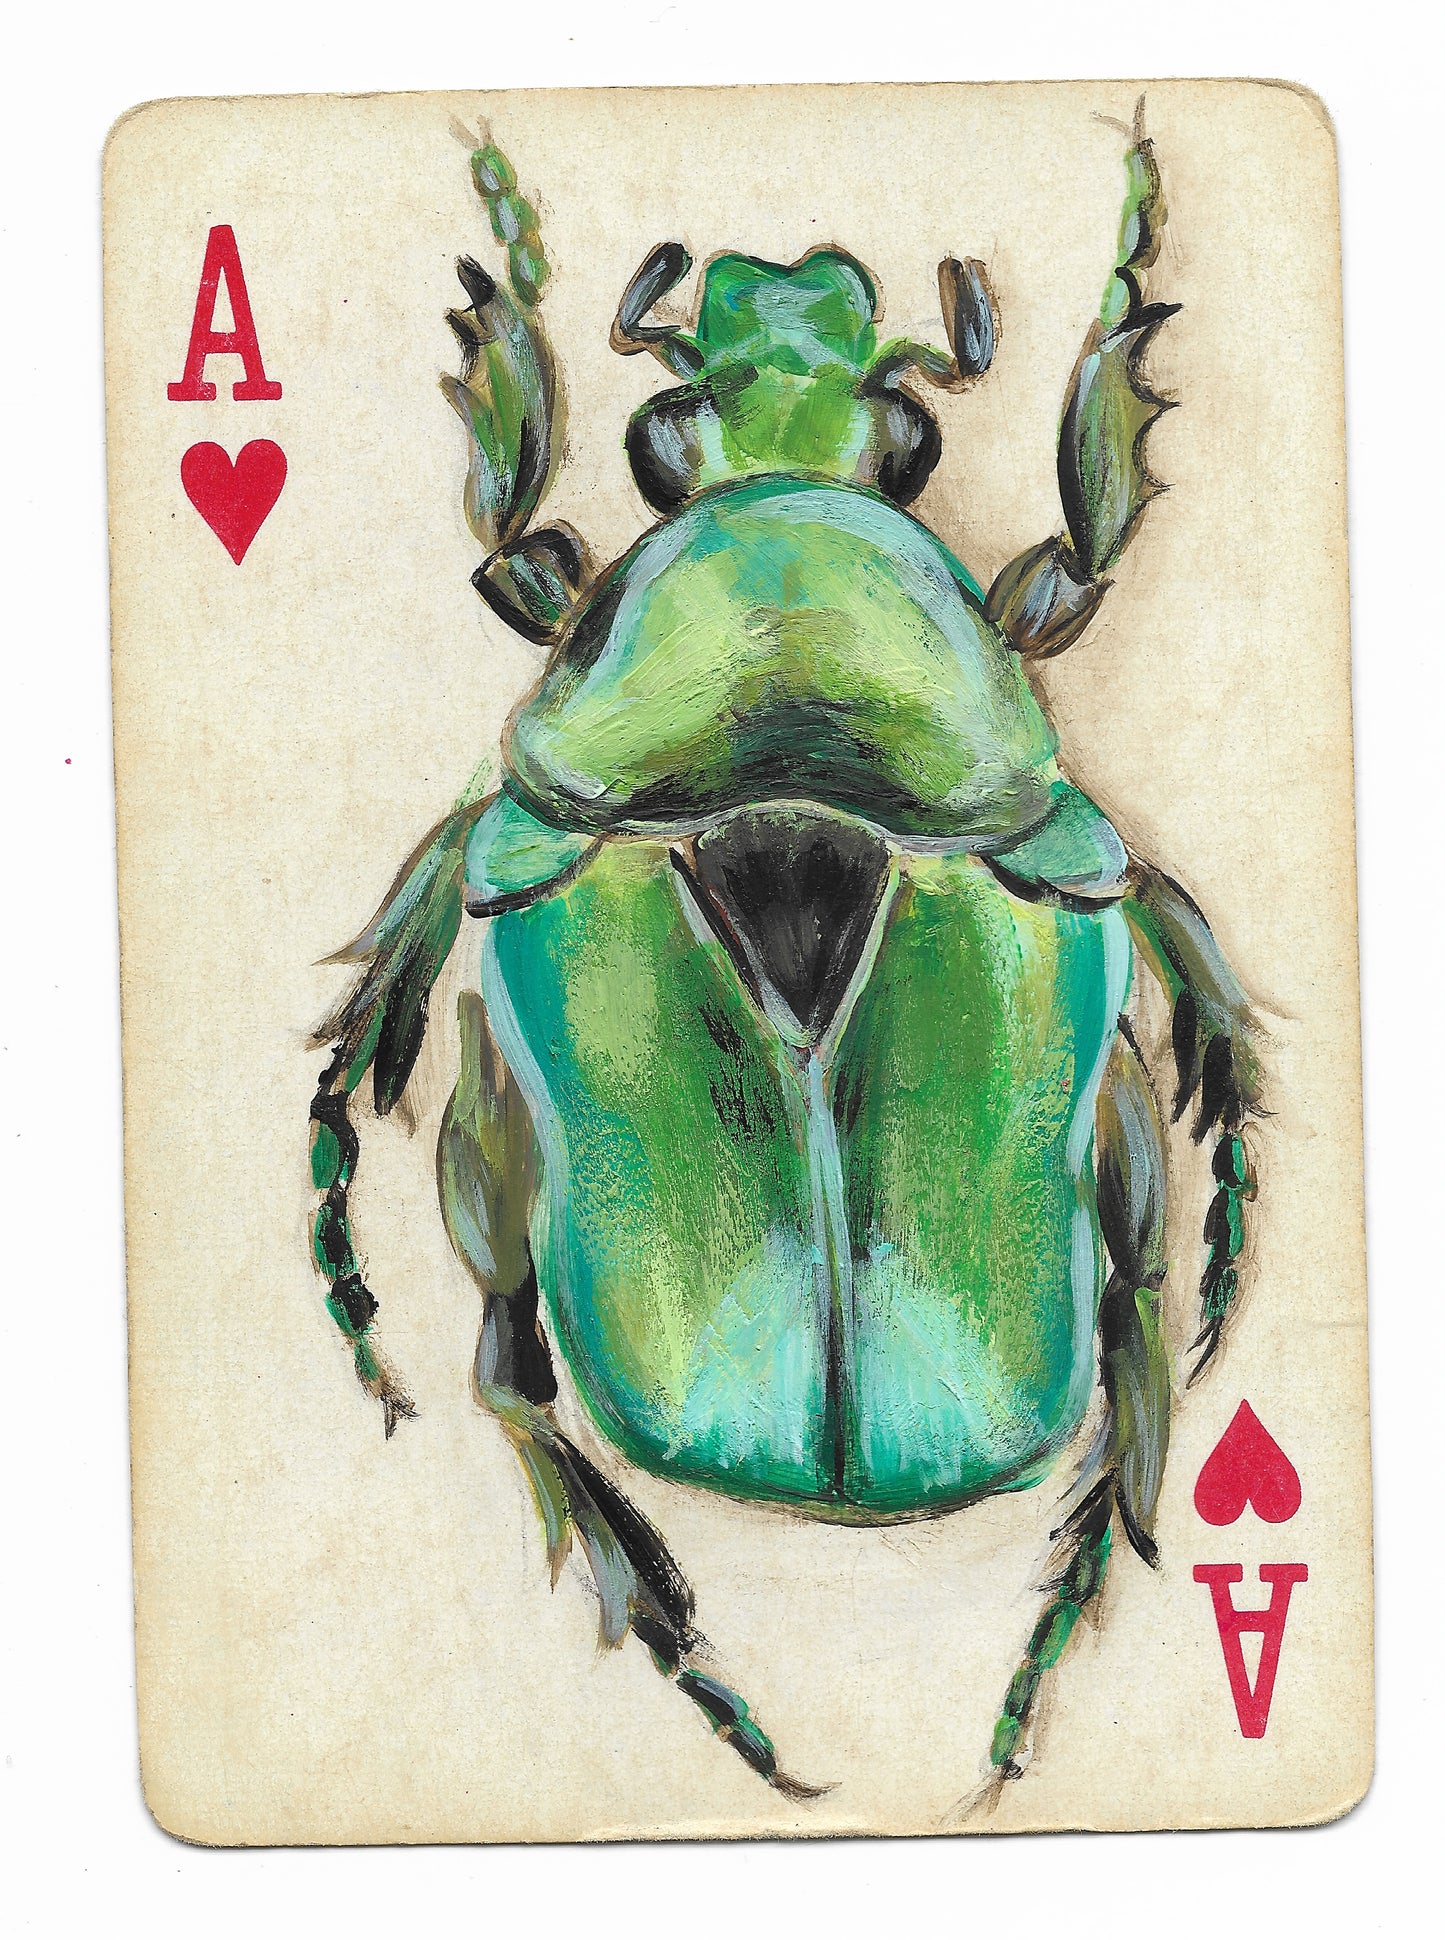 Playing Card Paintings | Bugs